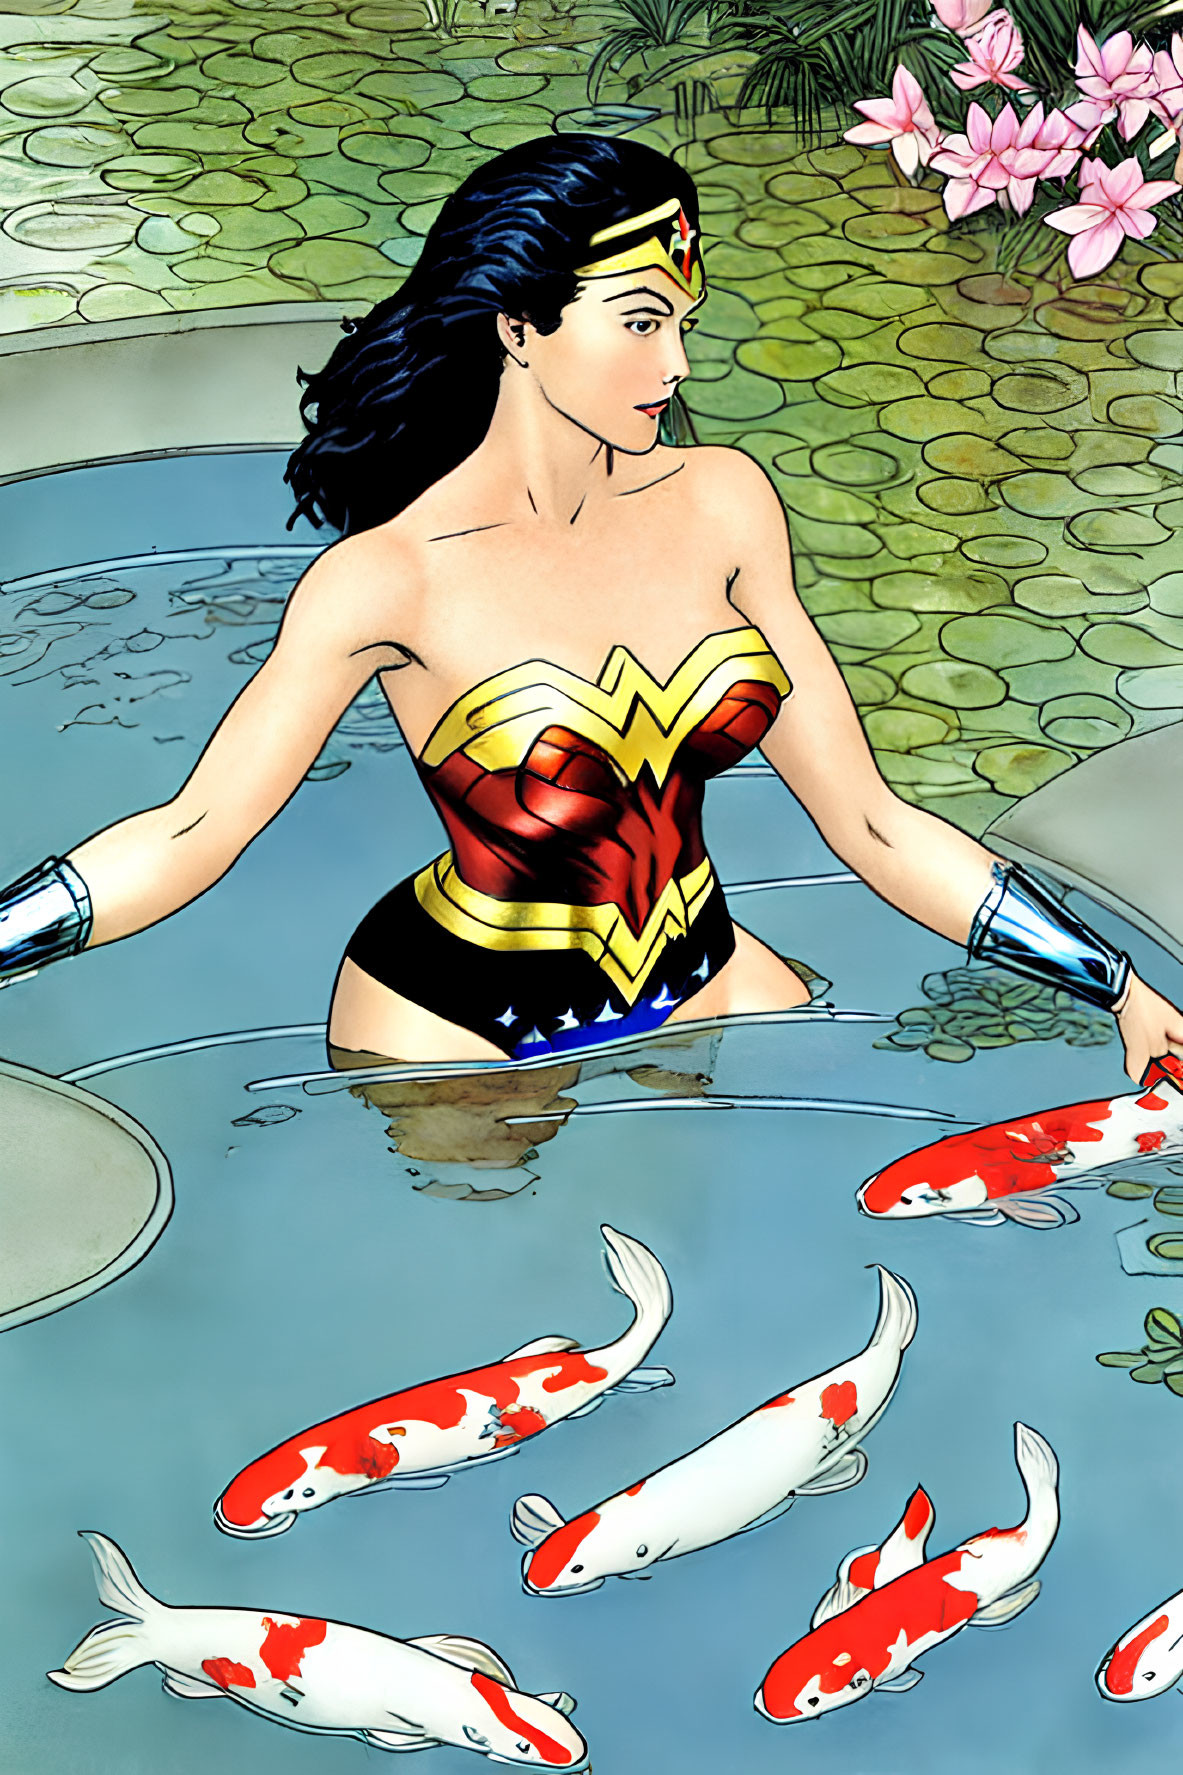 Wonder Woman kneeling by pond with koi fish, lily pads, and pink flowers